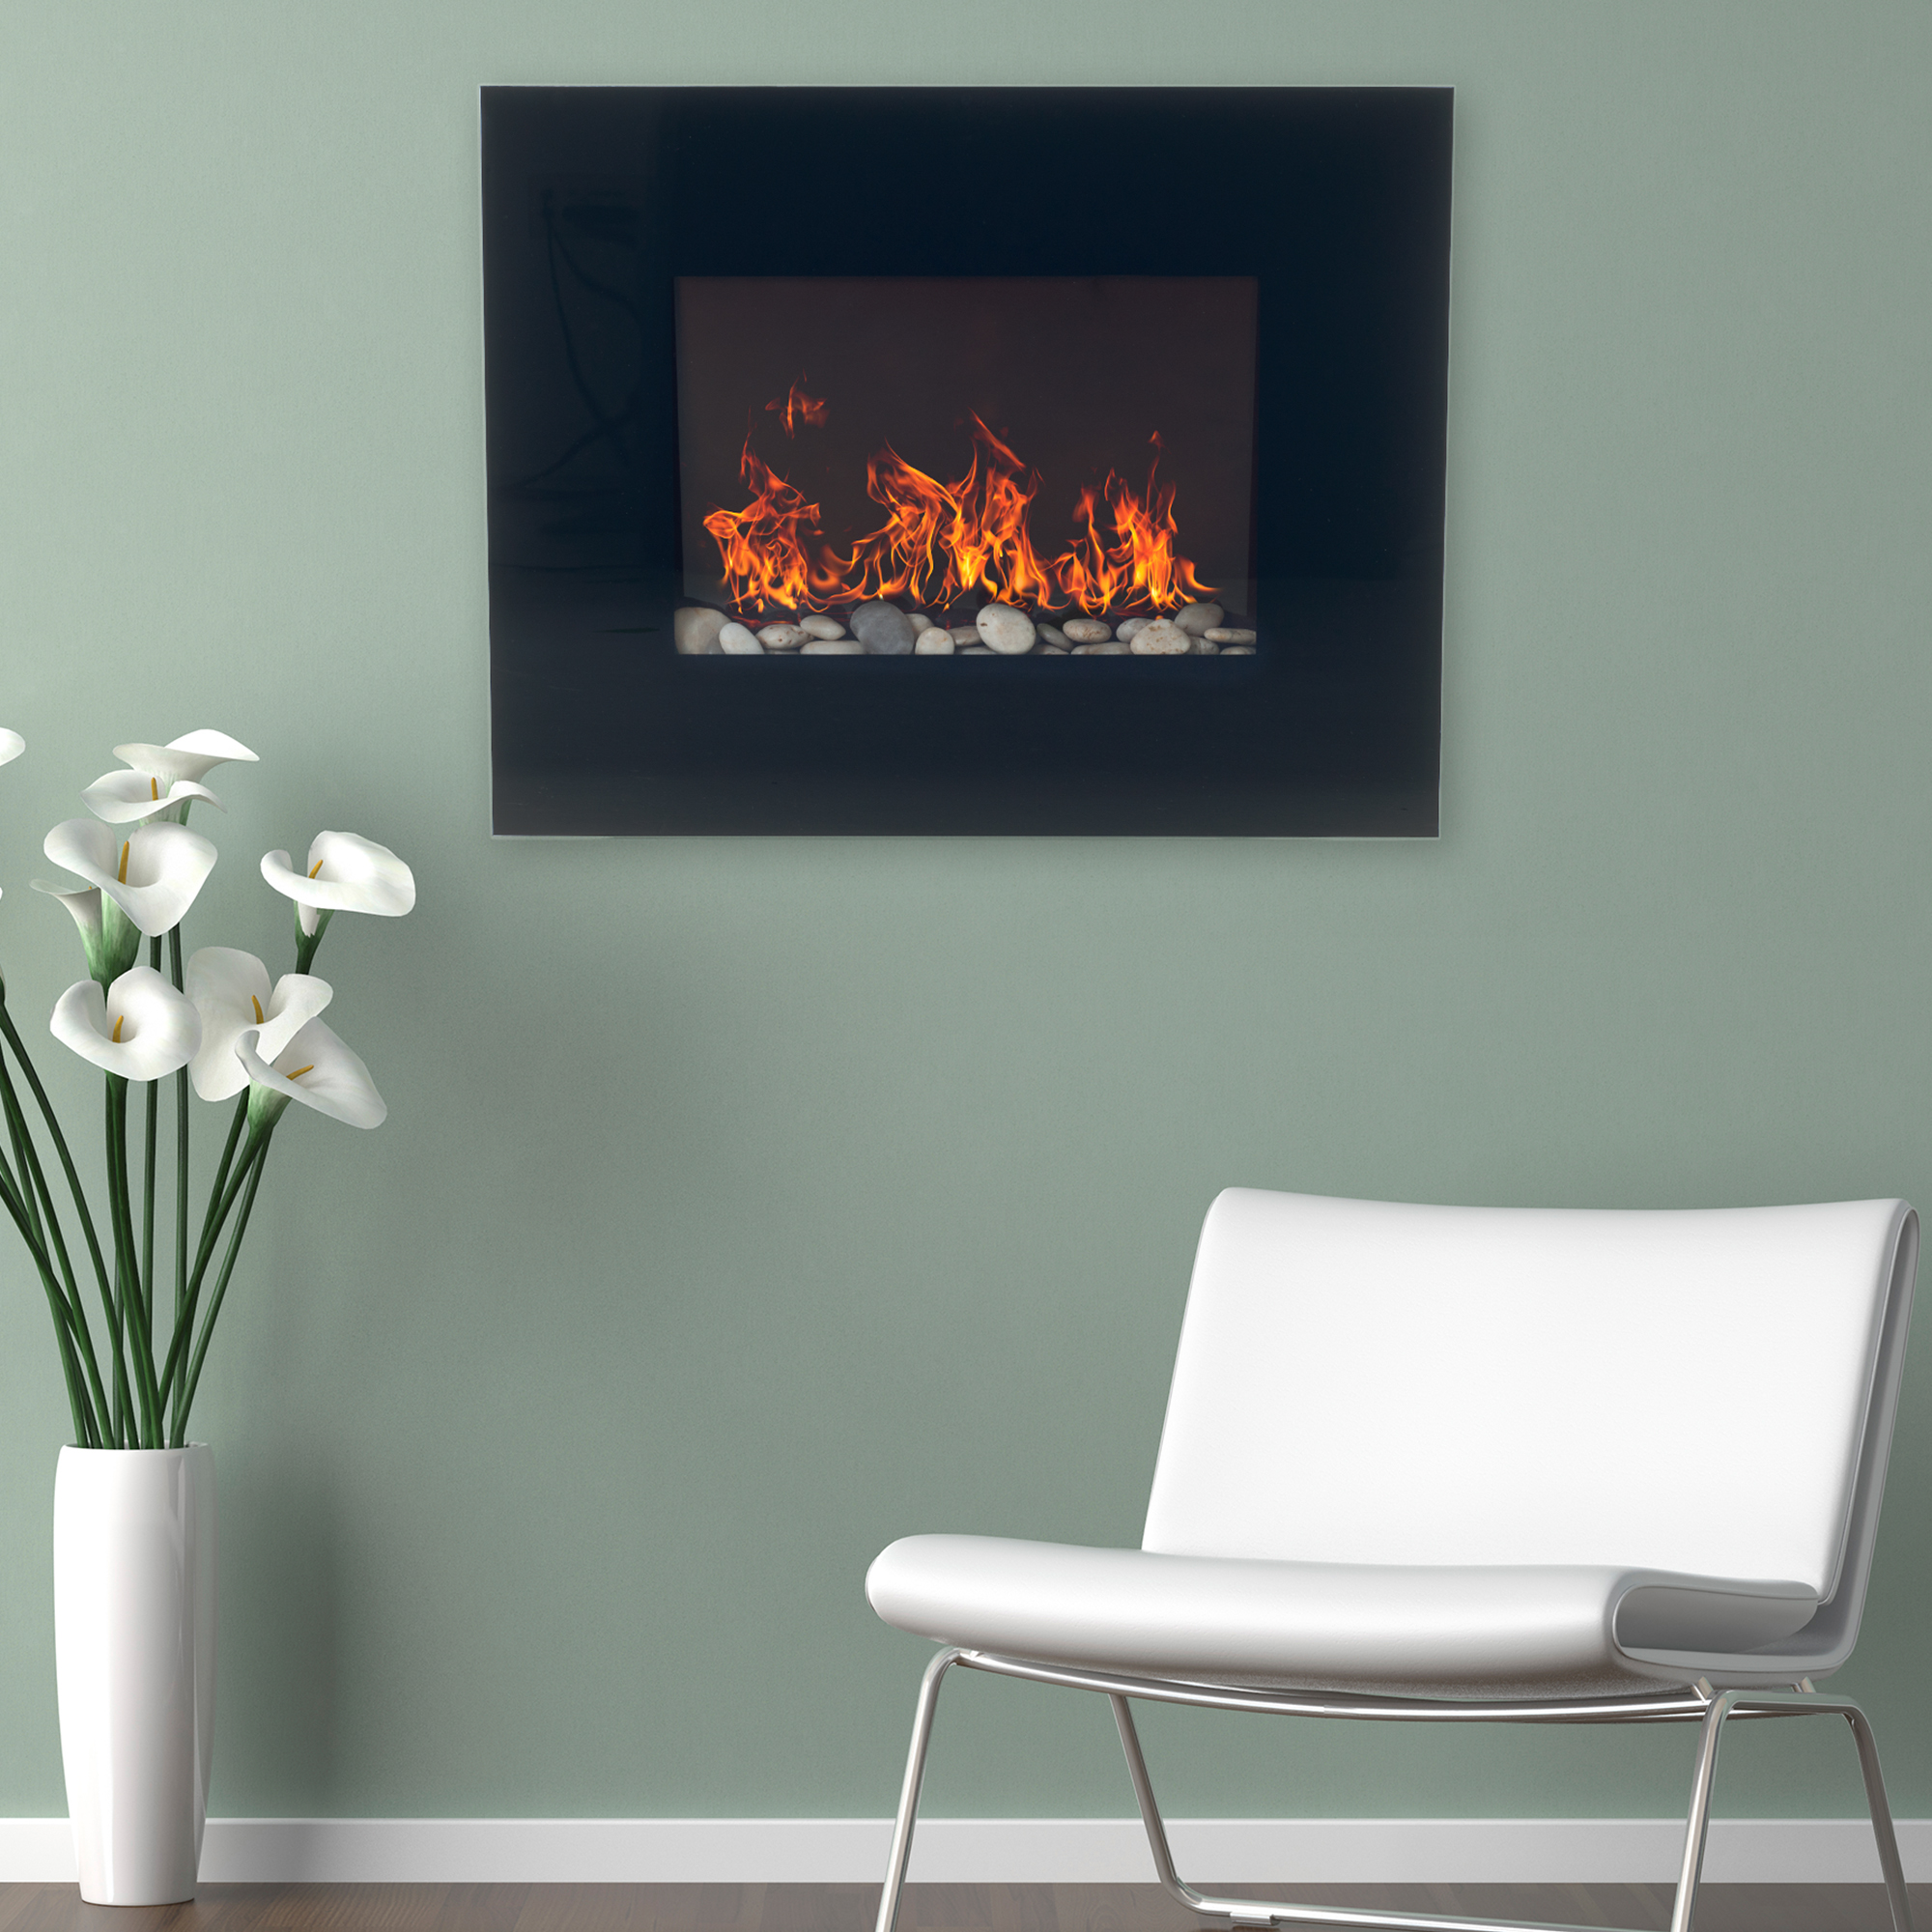 Northwest Black Glass Panel Electric Fireplace Wall Mount & Remote